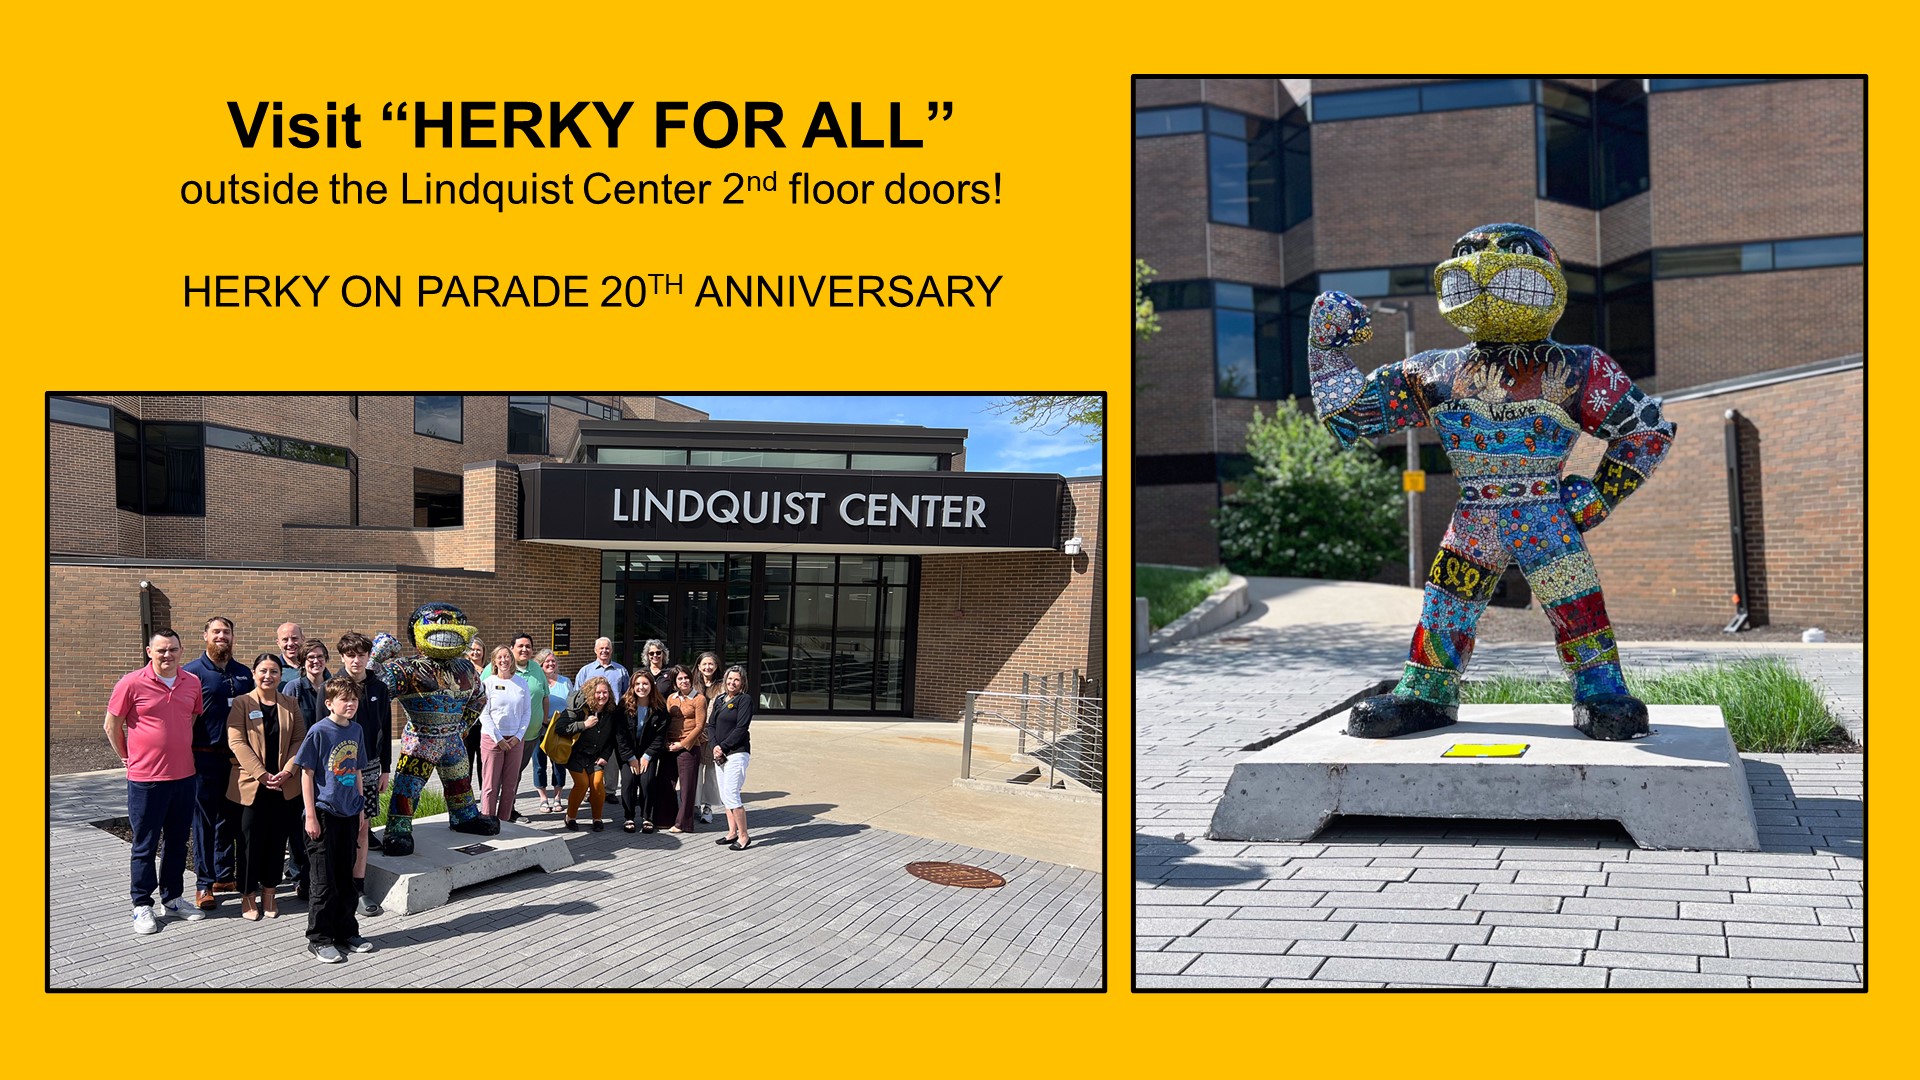 Visit “HERKY FOR ALL” outside the Lindquist Center 2nd floor doors!  HERKY ON PARADE 20TH ANNIVERSARY